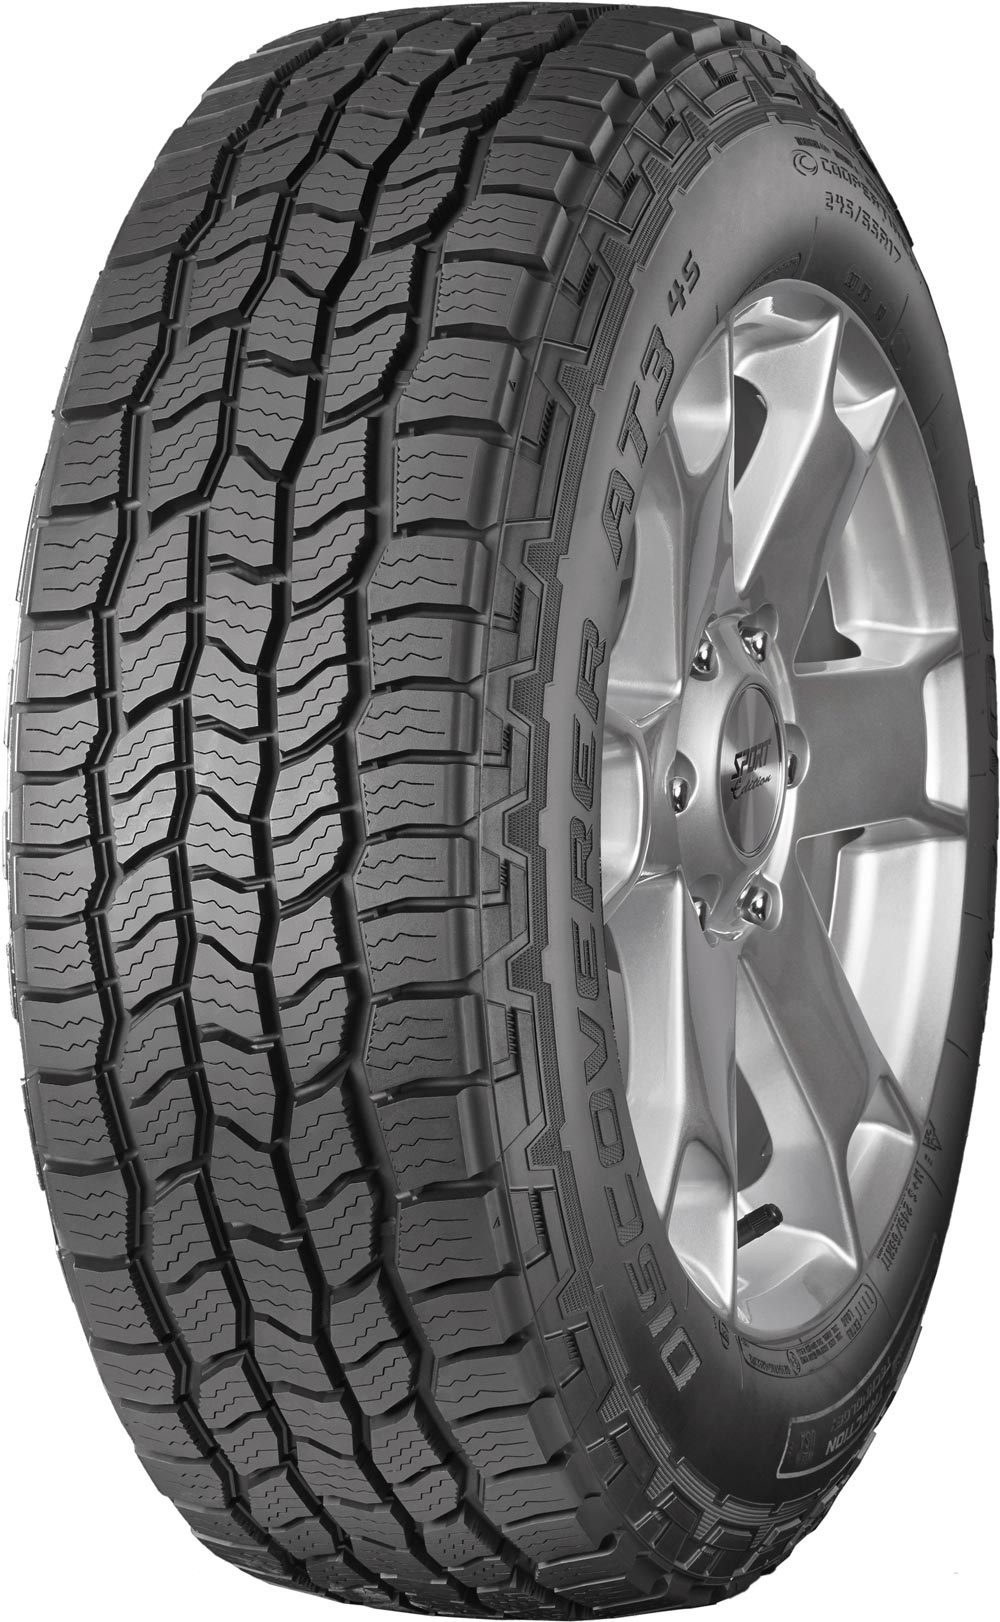 Джипови гуми COOPER DISCOVERER AT3 4S 265/70 R18 116T